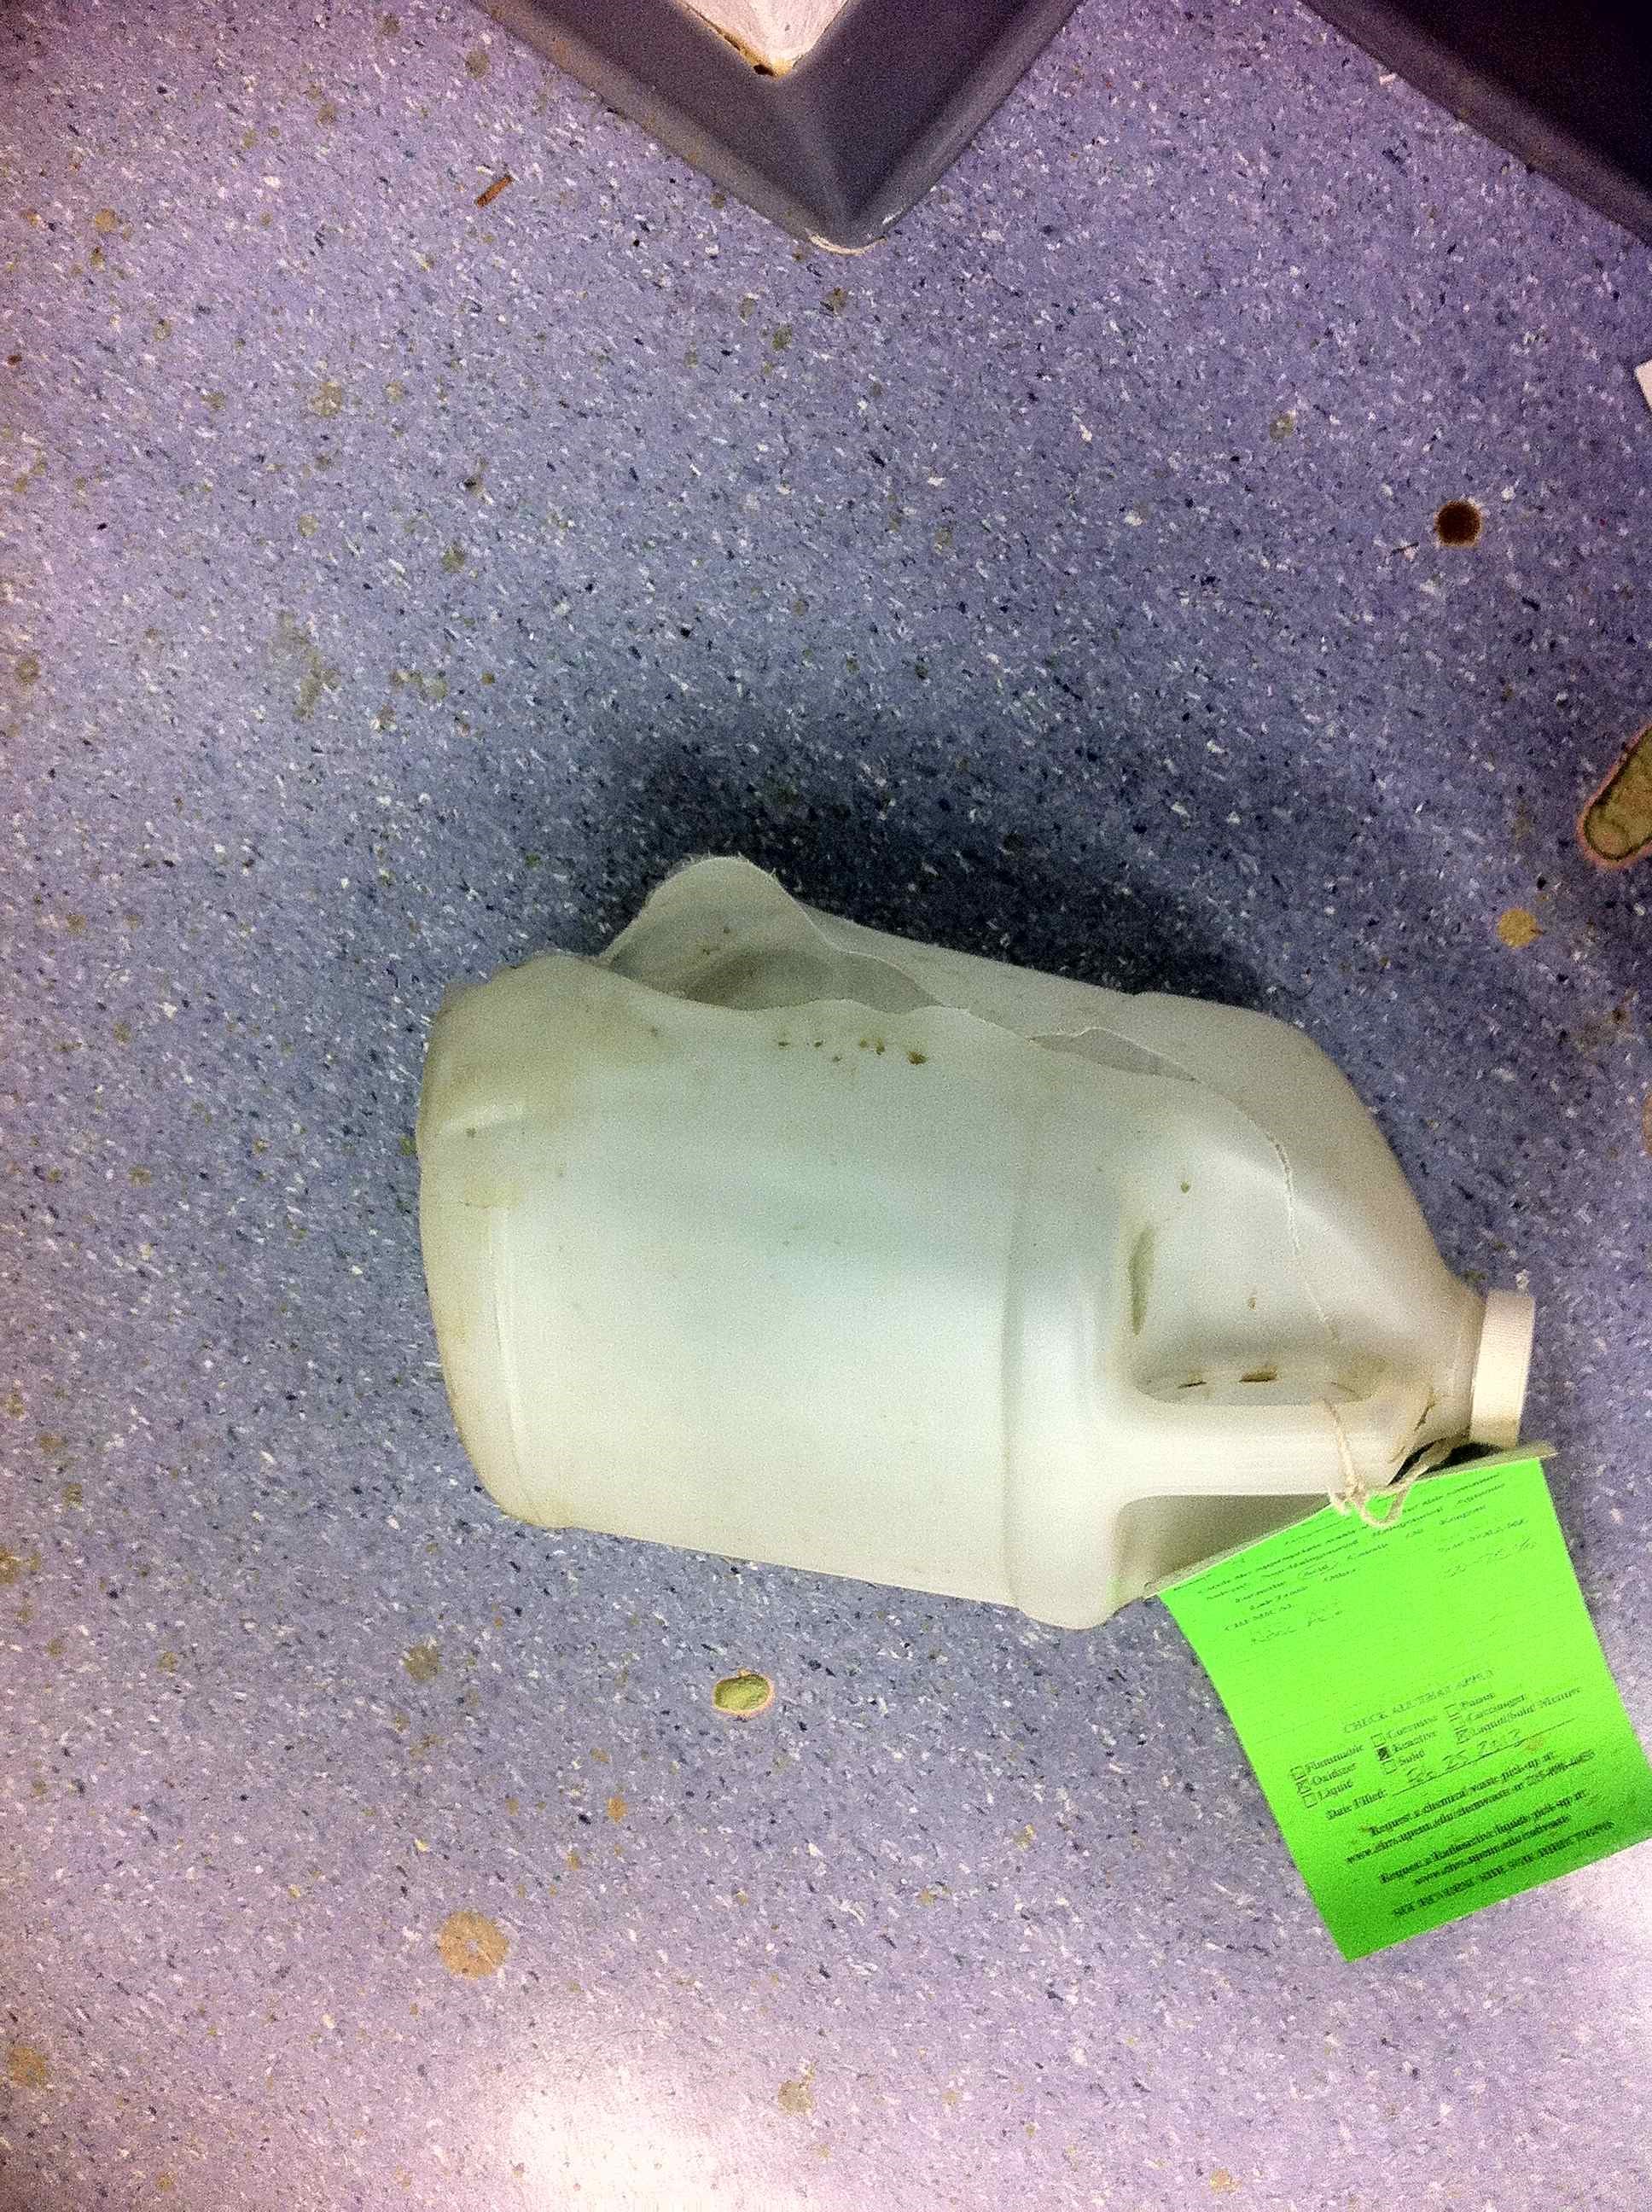 plastic 1-gallon bottle ruptured from nitric acid reaction with water in sealed bottle